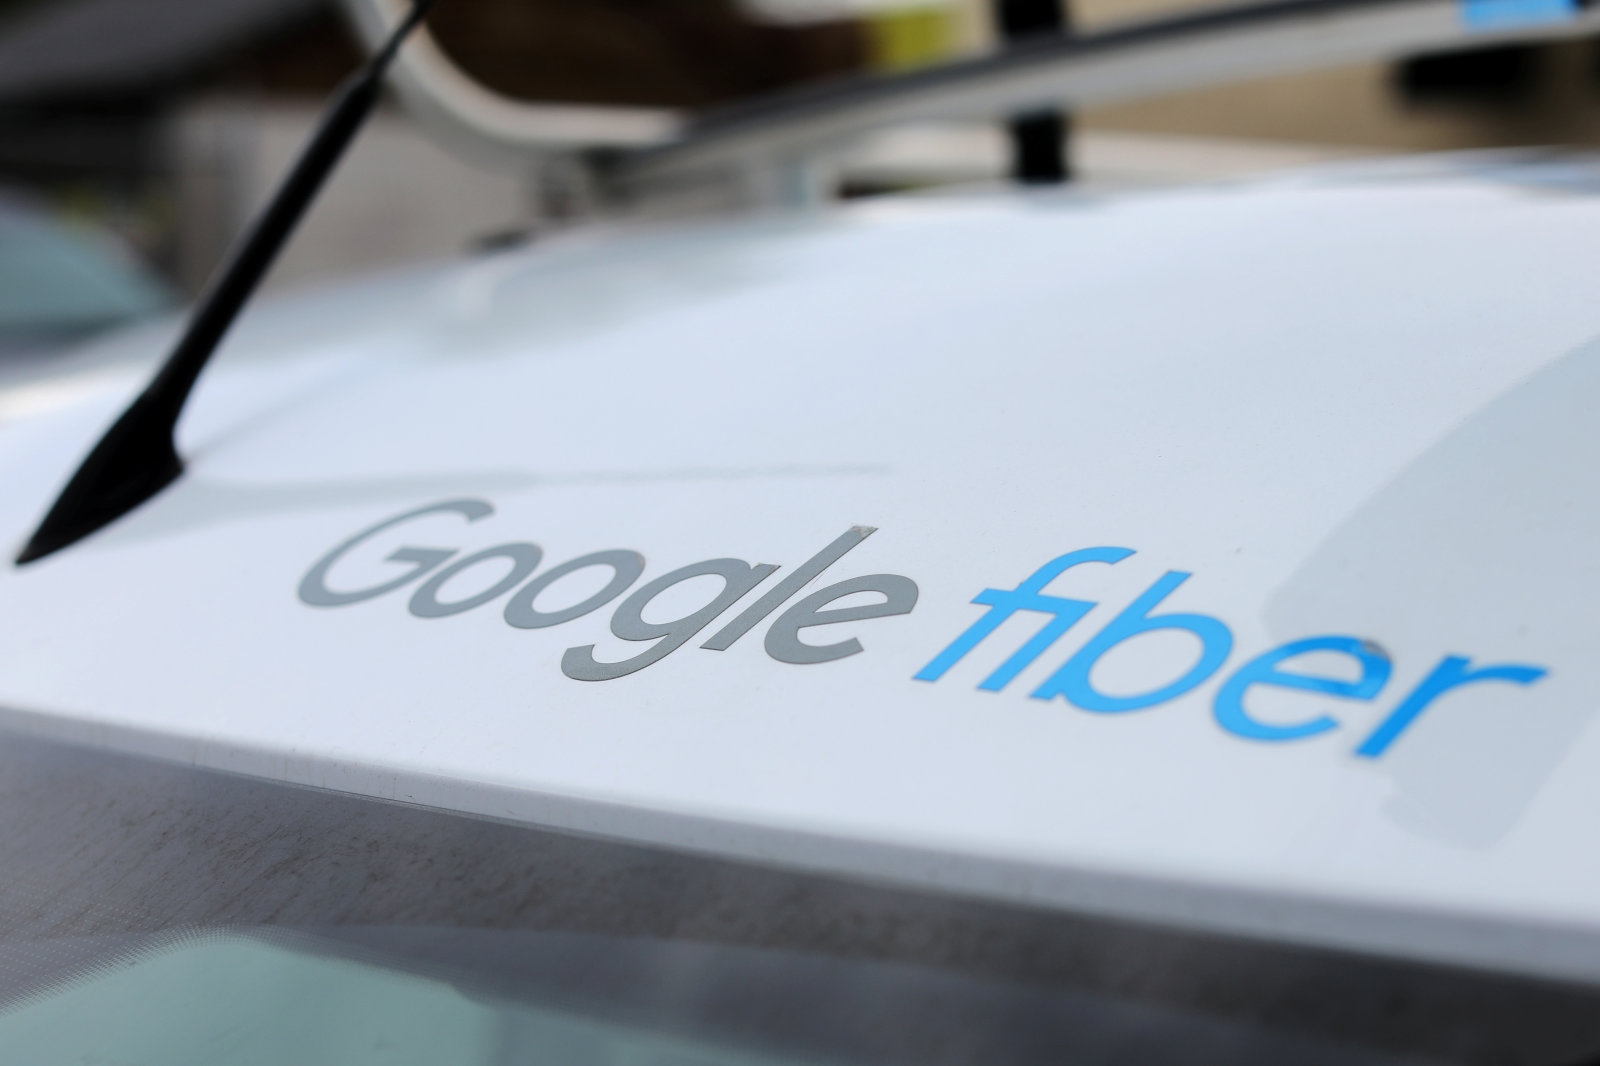 Google Fiber drops its 100Mbps tier in favor of gigabit-only service | DeviceDaily.com